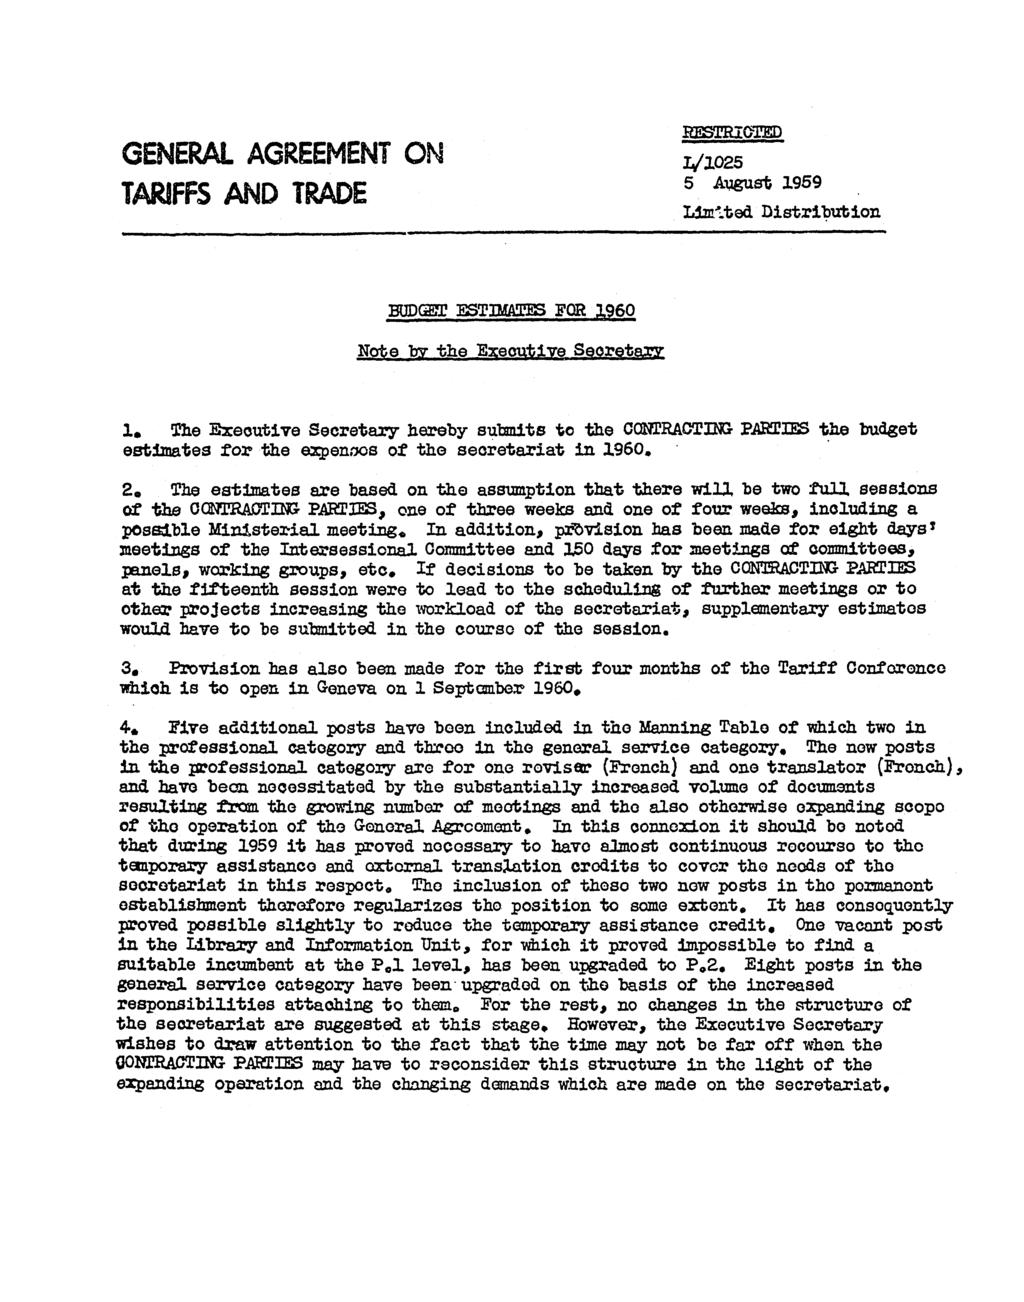 RESTRICTED GENRAL AGREEMENT ON L/1025 TARIFFS AND TRADE 5 August 1959 Limited Distribution BUDGET ESTIMATESFOR 1960 Note by the Eecutive Secretary 1.